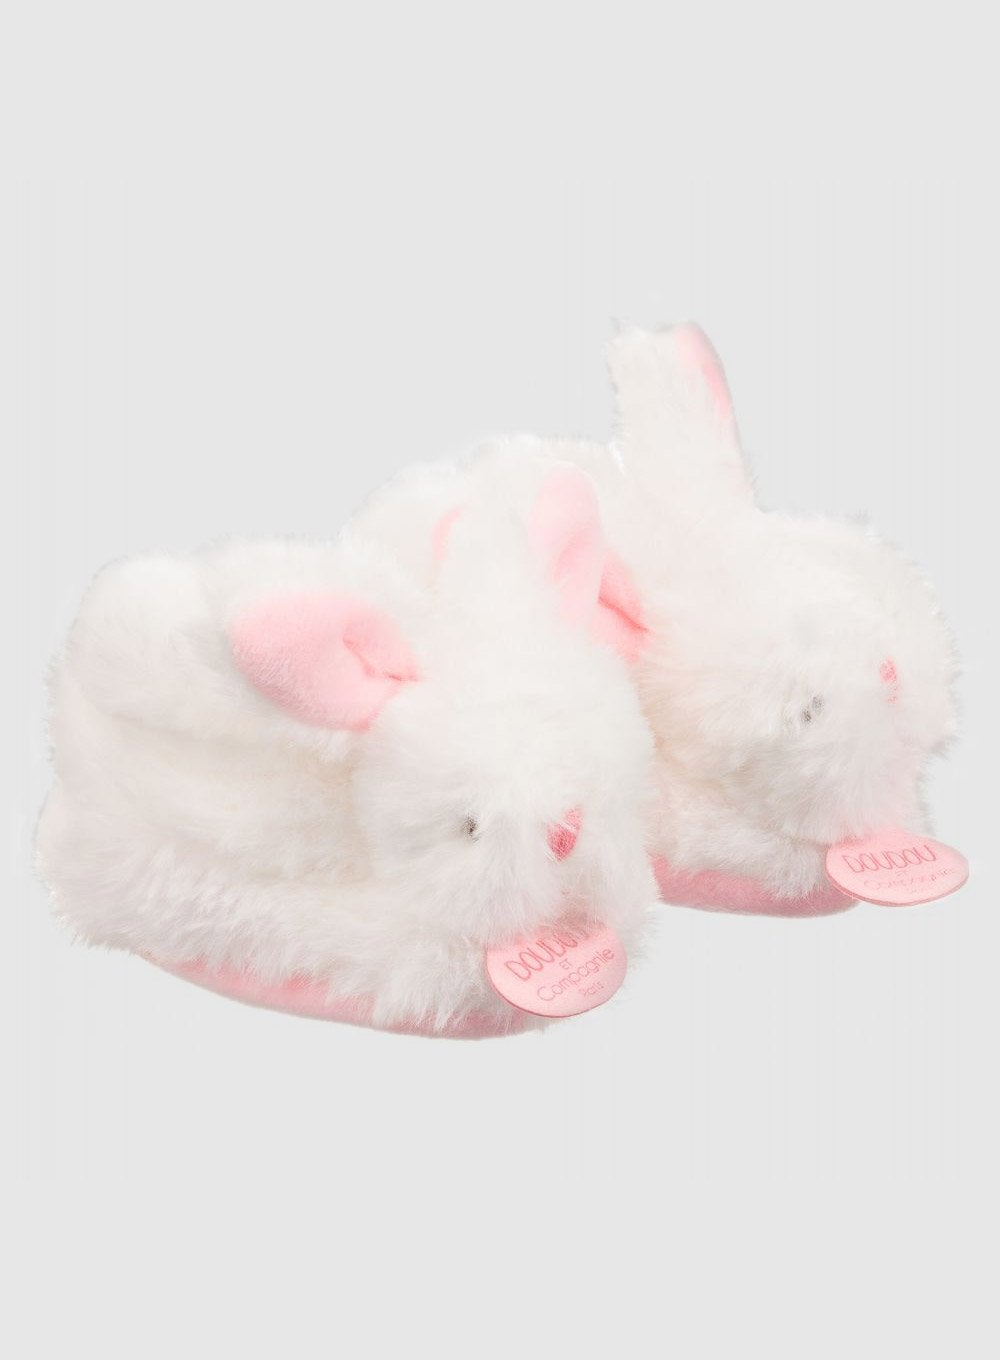 DOUDOU ET COMPAGNIE - White Small Soft Bunny with Blankie